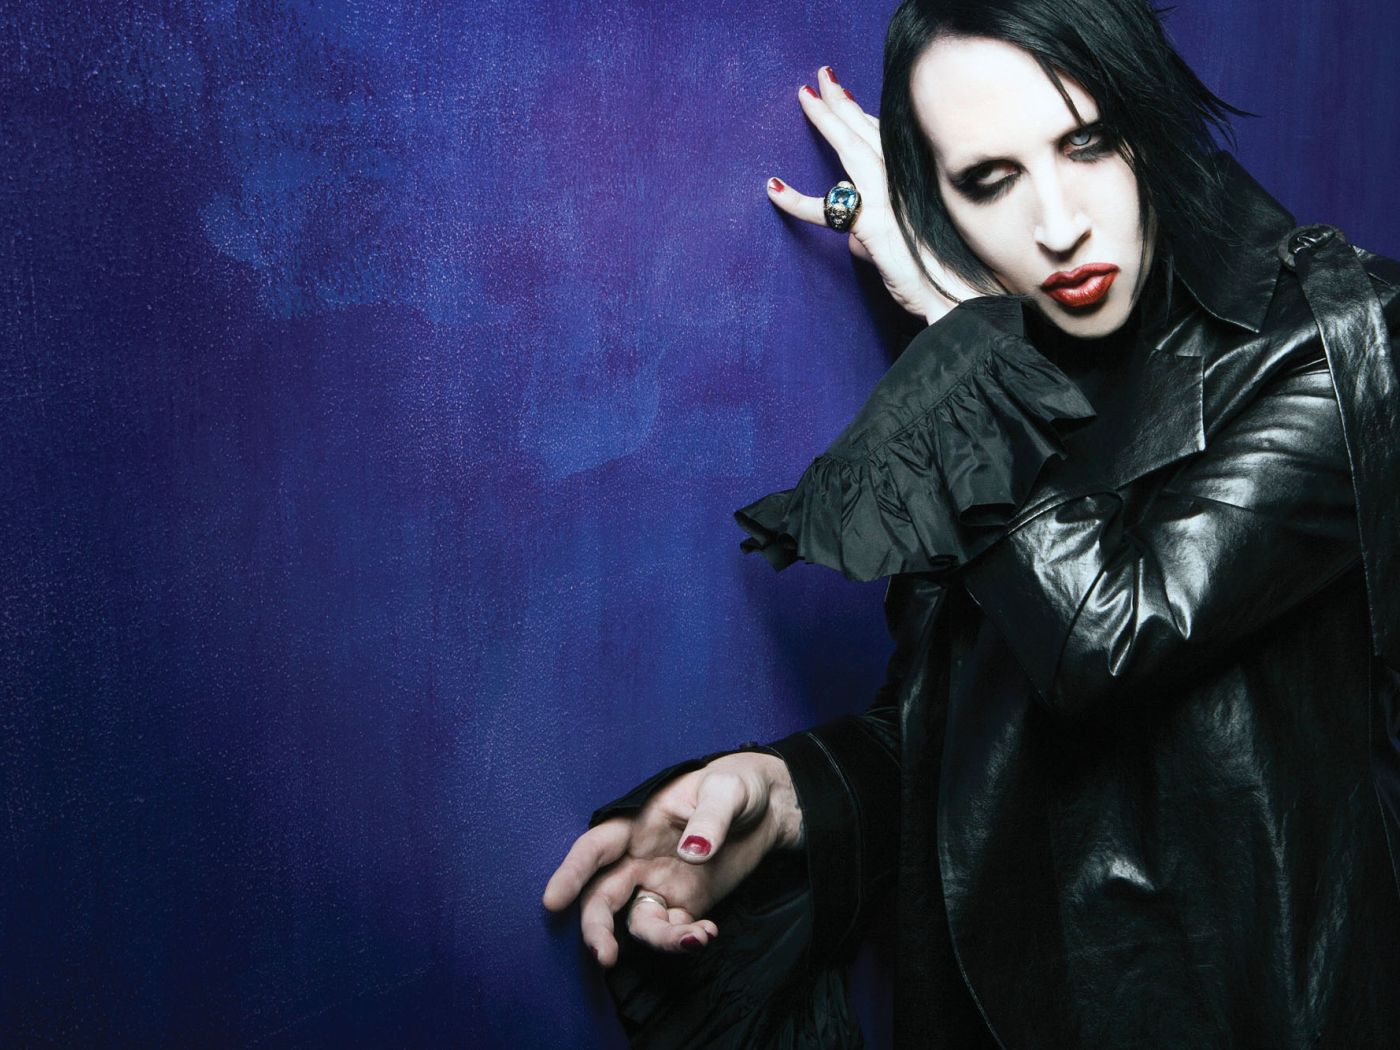 Marilyn Manson at the blue wall